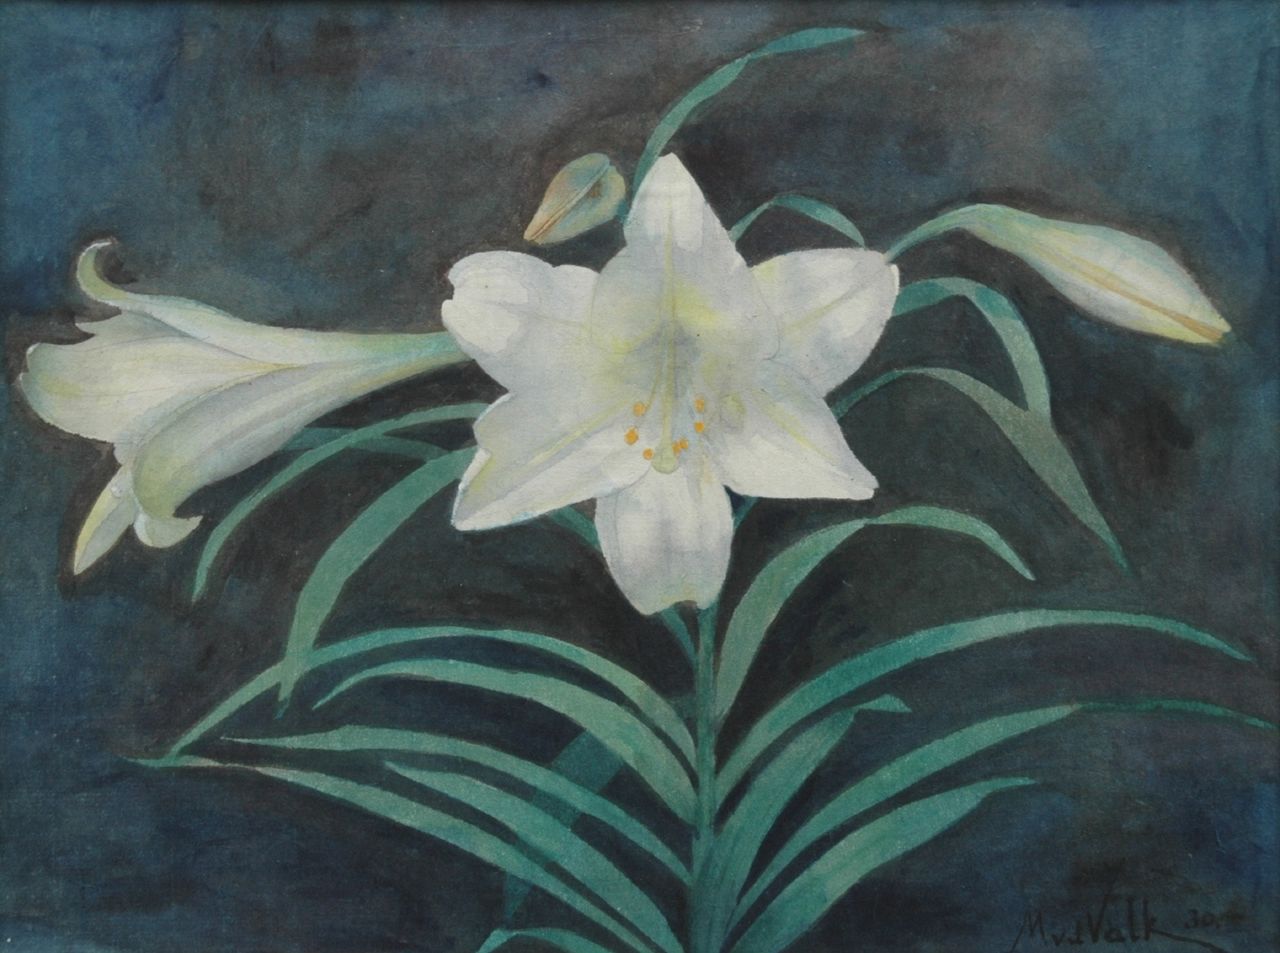 Mauritx Willem van der Valk | White lilly, pencil and watercolour on paper, 27.9 x 36.8 cm, signed l.r. and painted '30